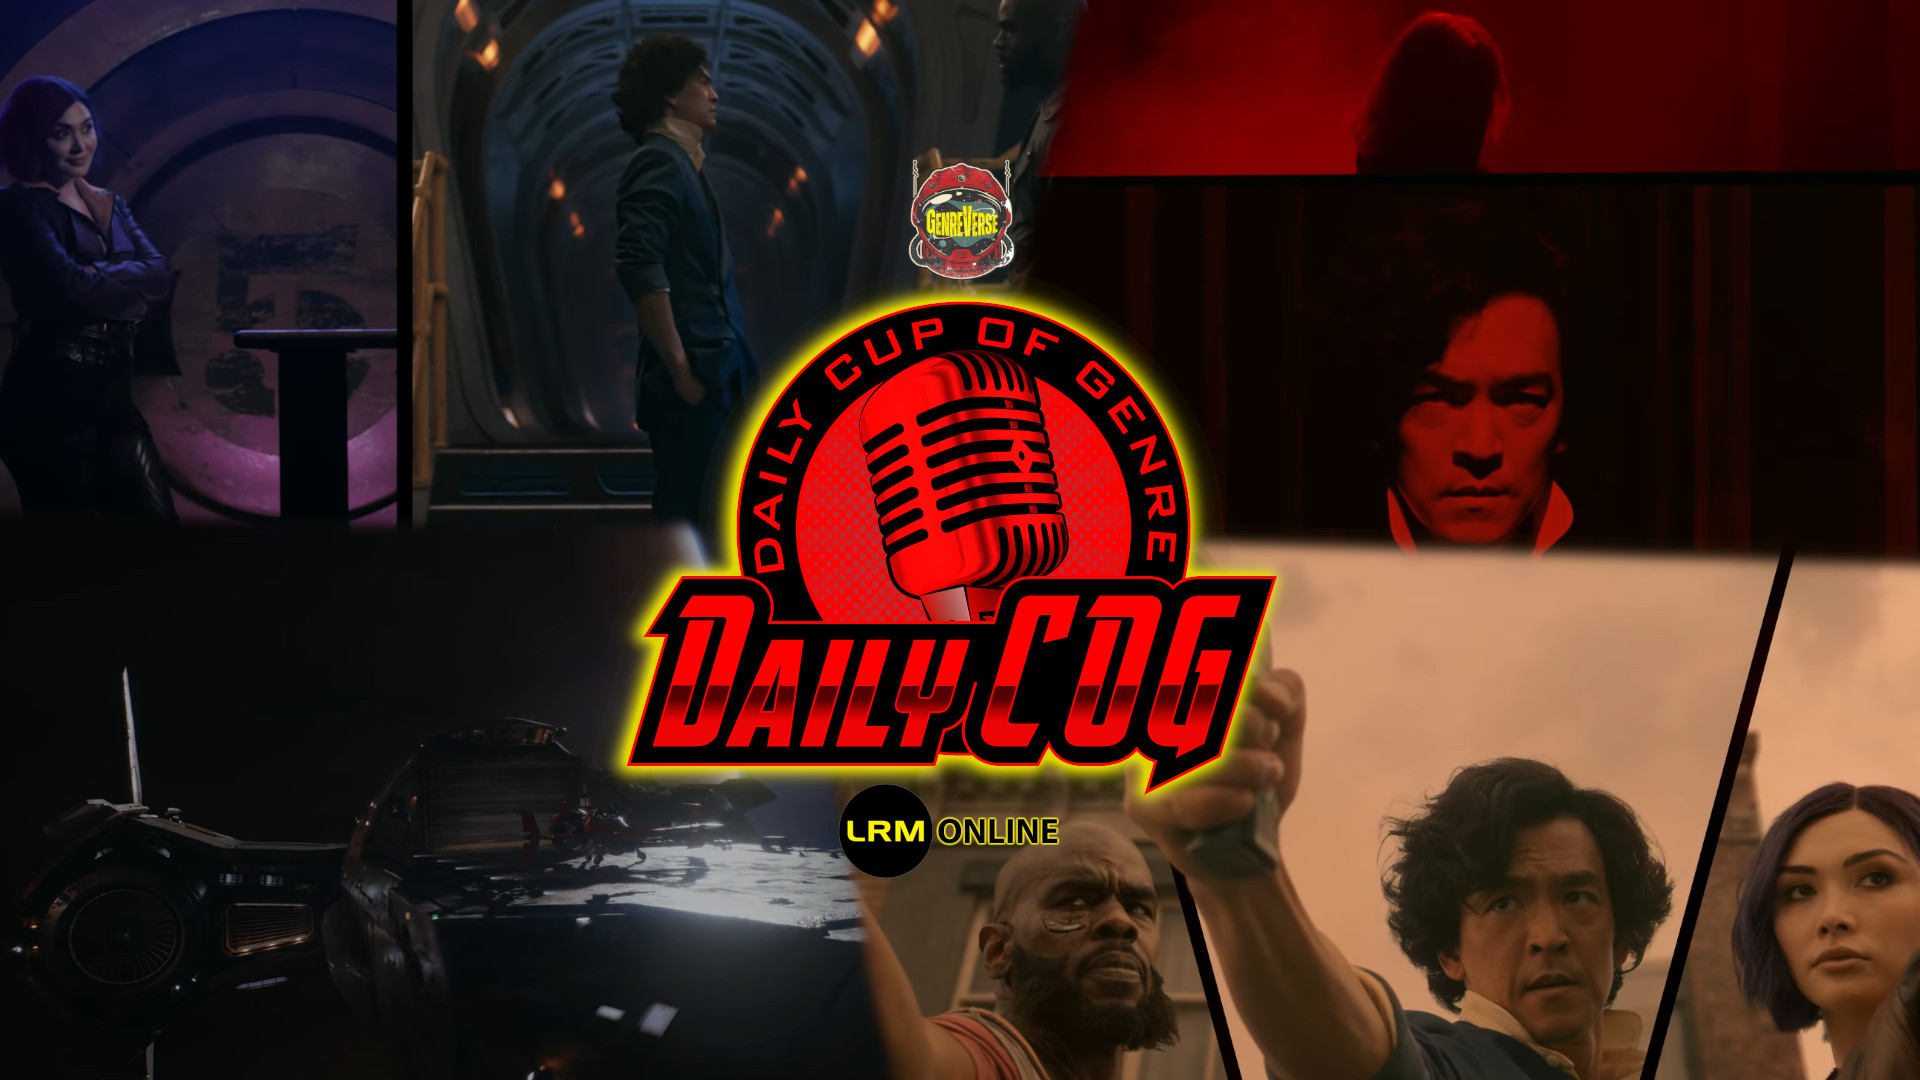 Cowboy Bebop Teaser Reaction And Discussing Why Anime Adaptations Usually Fail | Daily COG